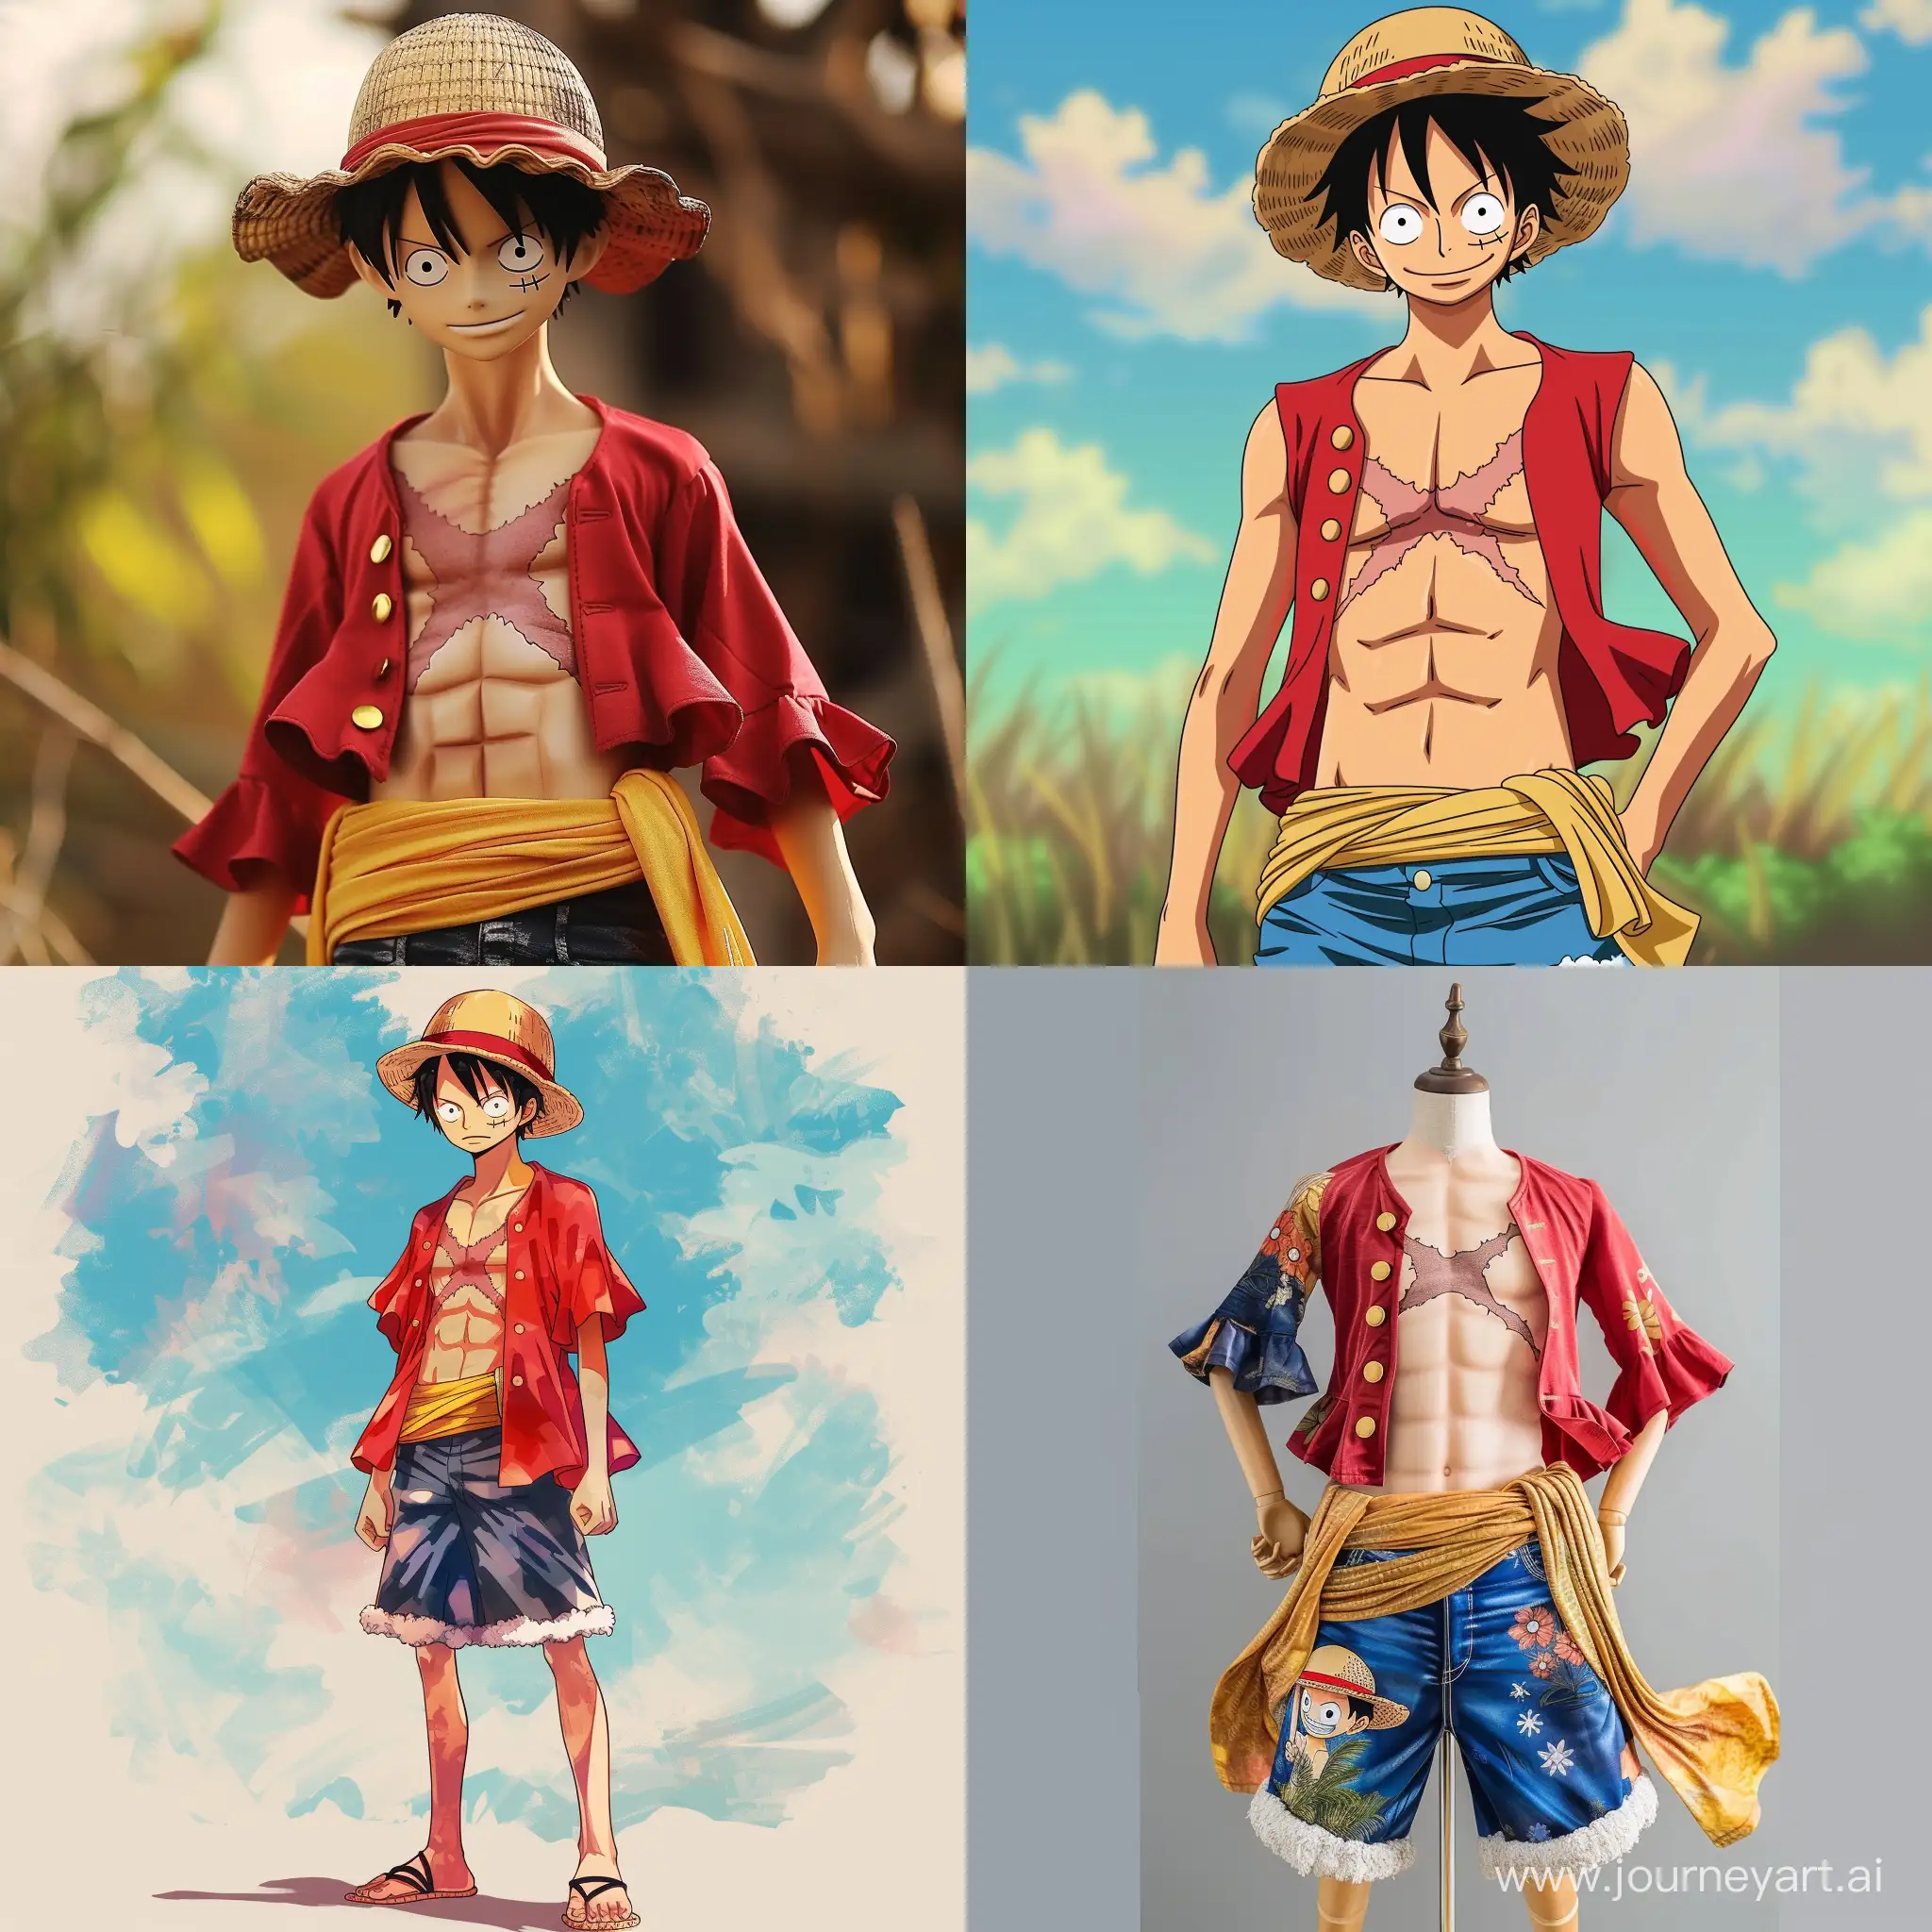 An anime style clothe similar to those who Monkey D Luffy usually wears.